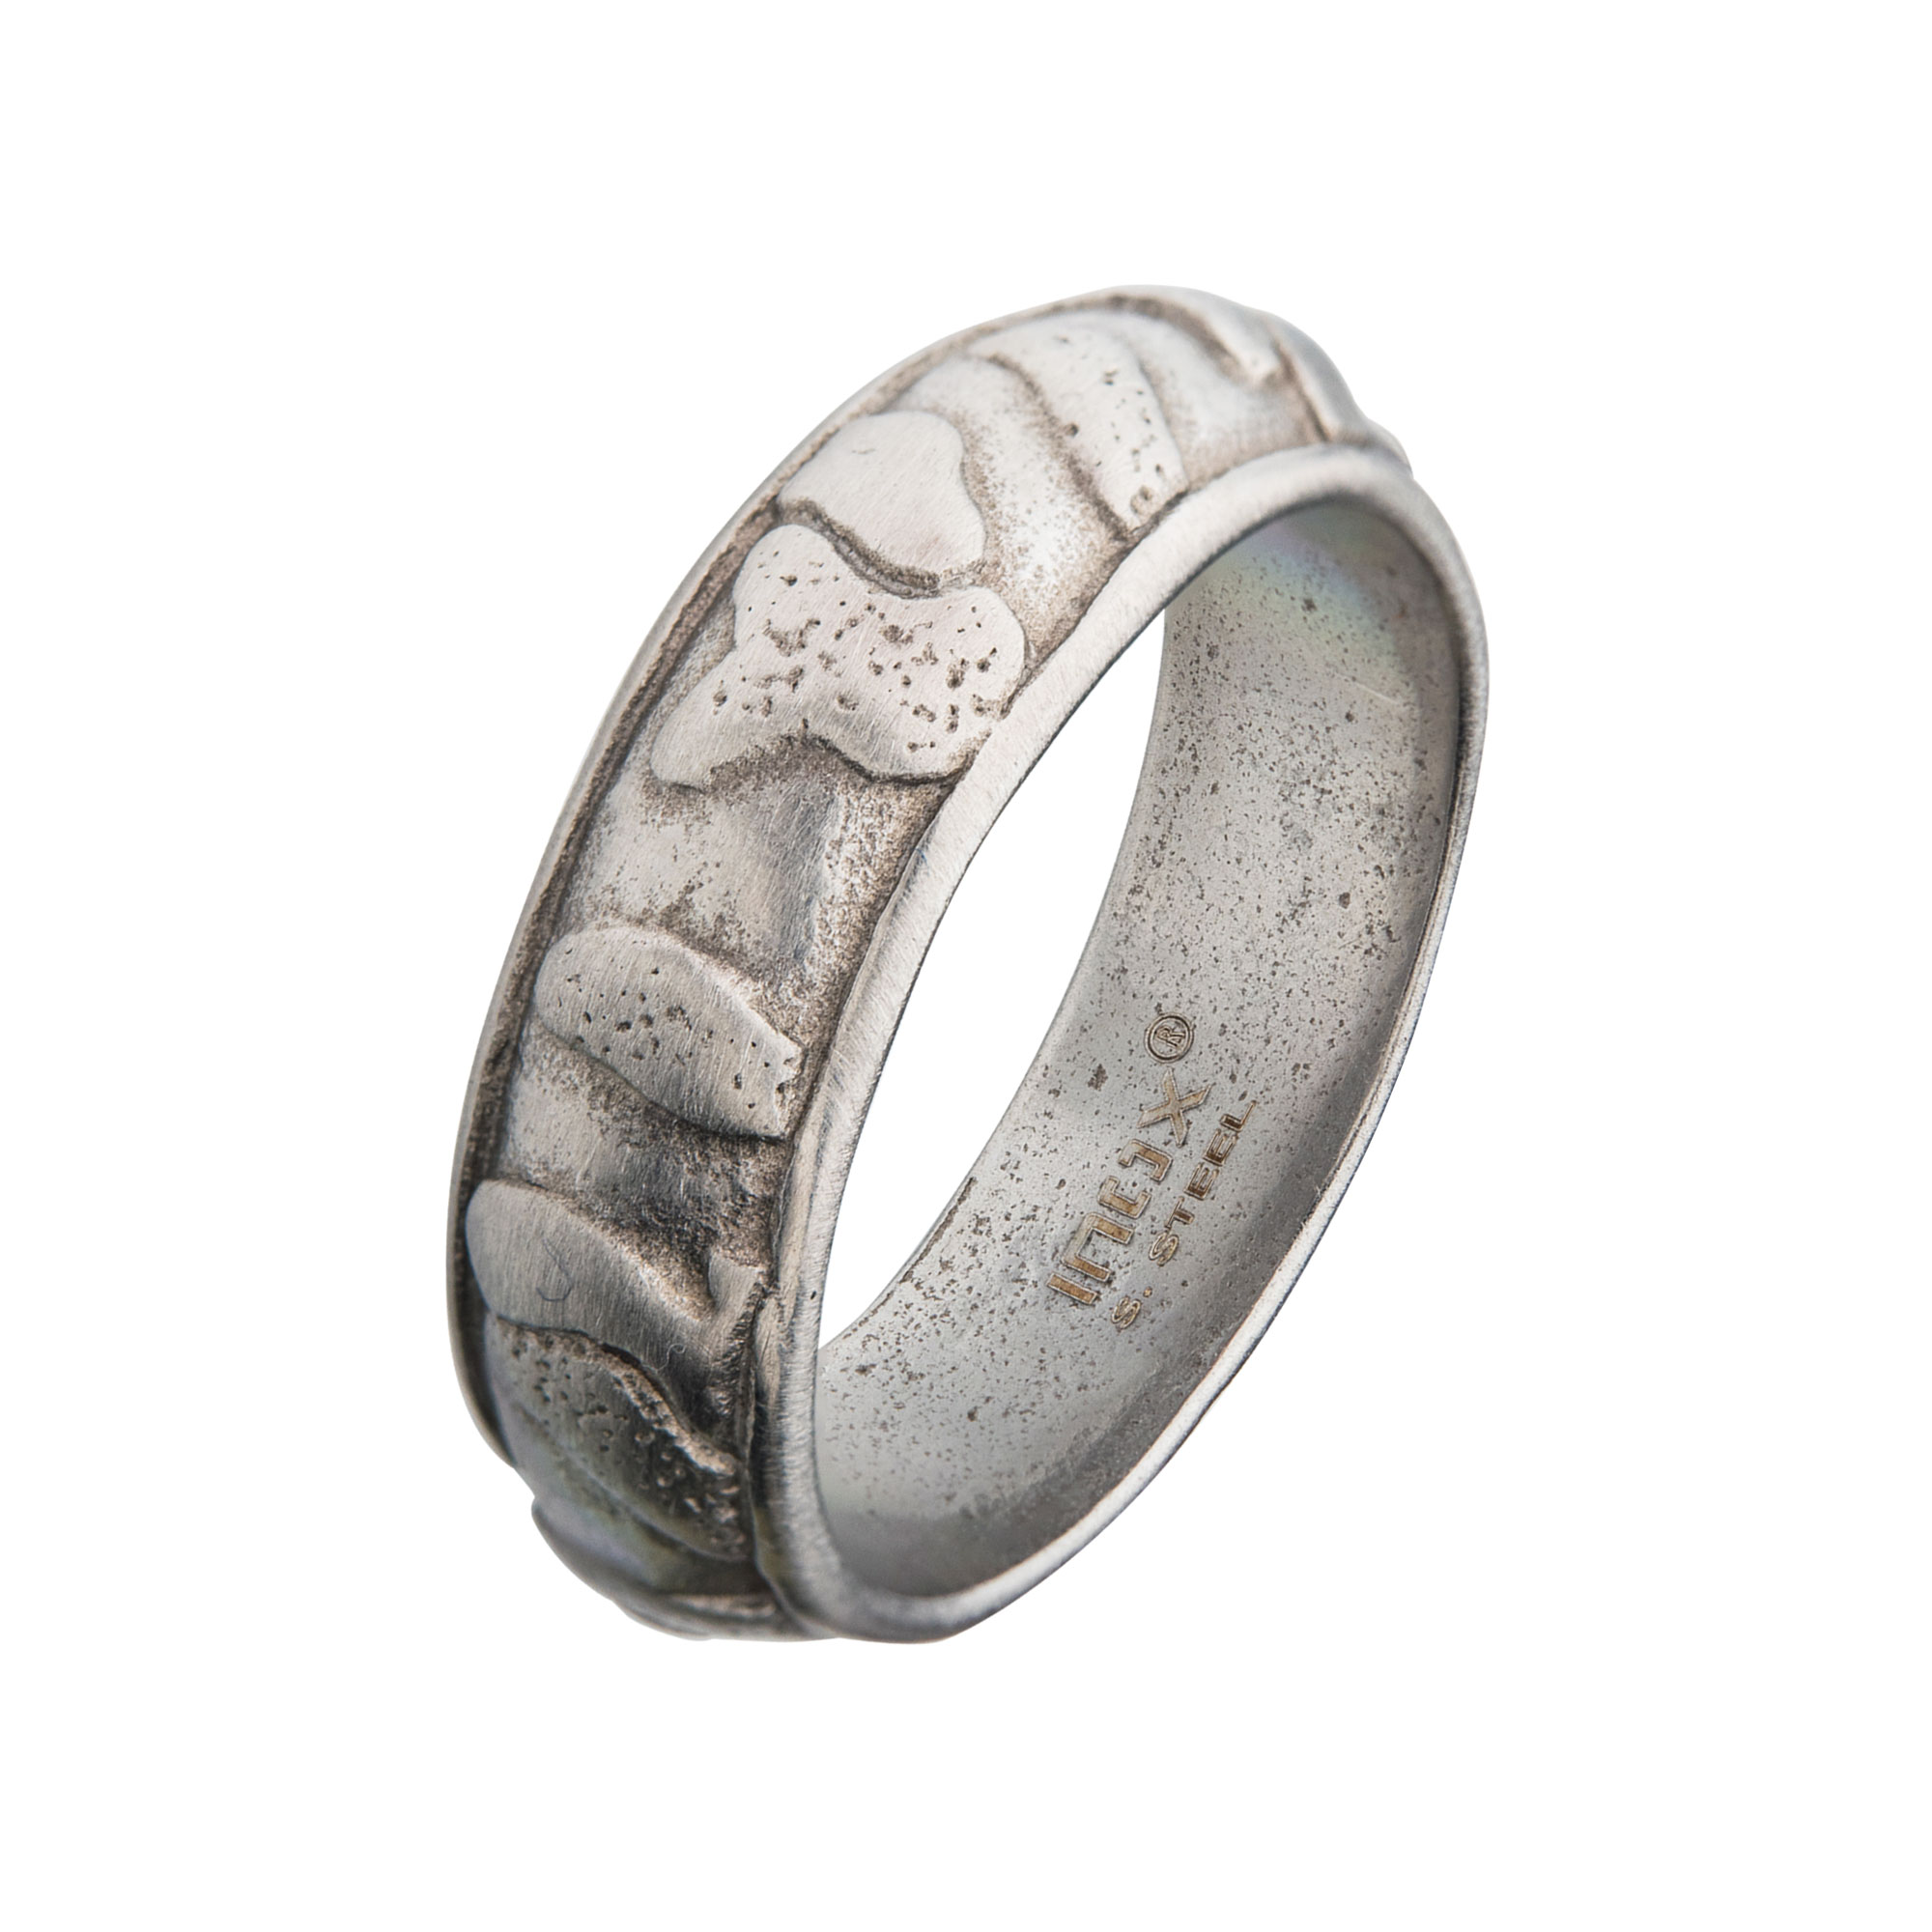 7.5mm Matte Steel 3D Canyon Pattern Ring Lewis Jewelers, Inc. Ansonia, CT